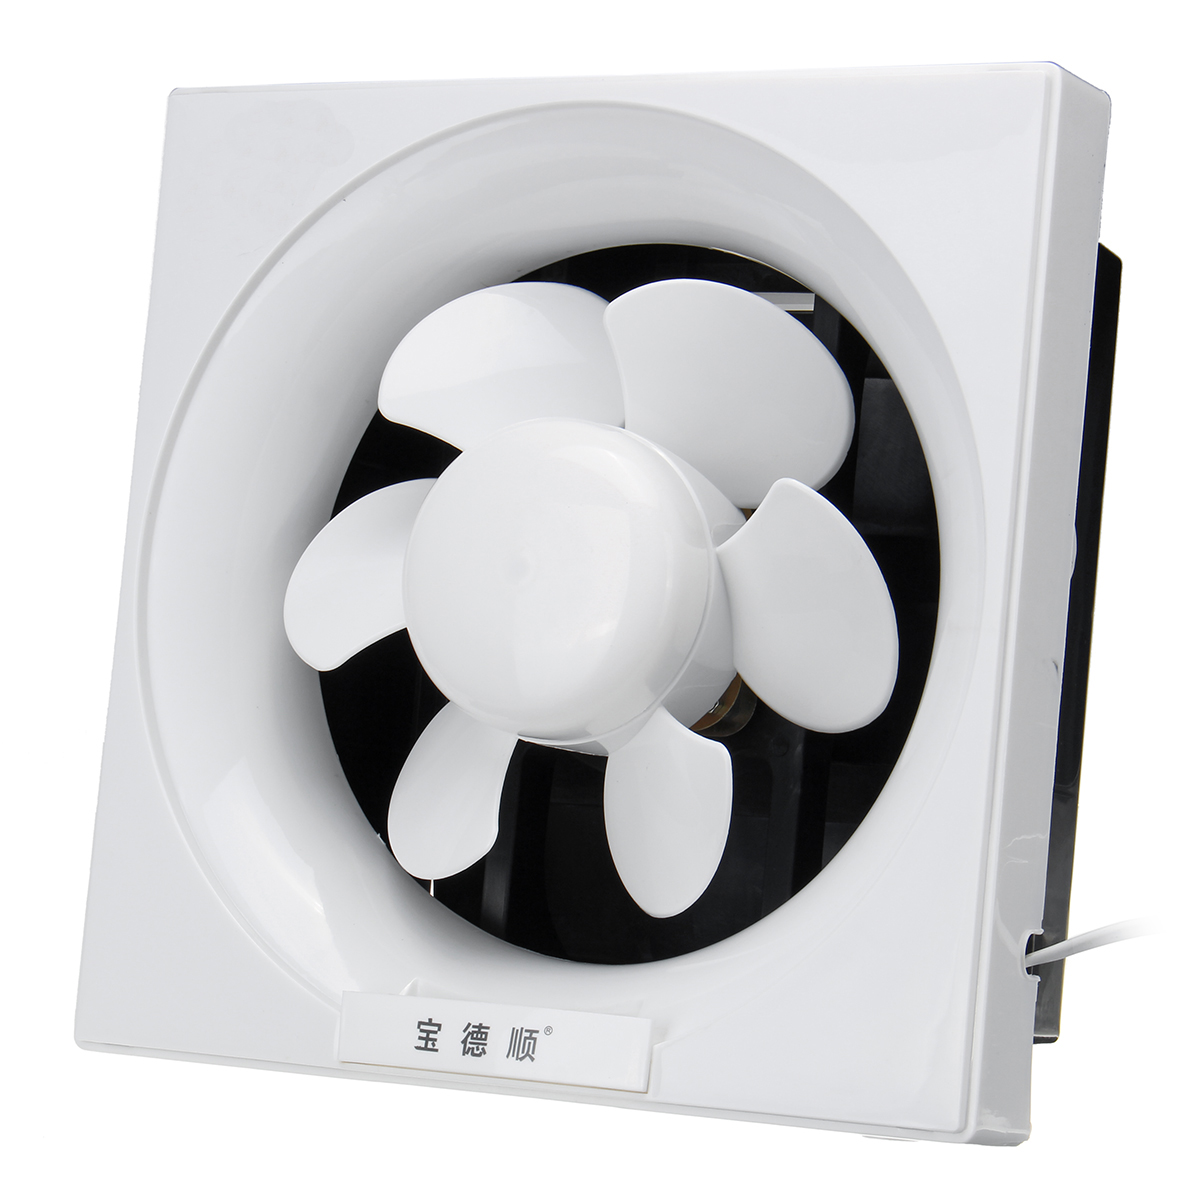 Powerful-Low-Noise-Ventilation-Extractor-Exhaust-Fan-Shutter-for-Bathroo-1348667